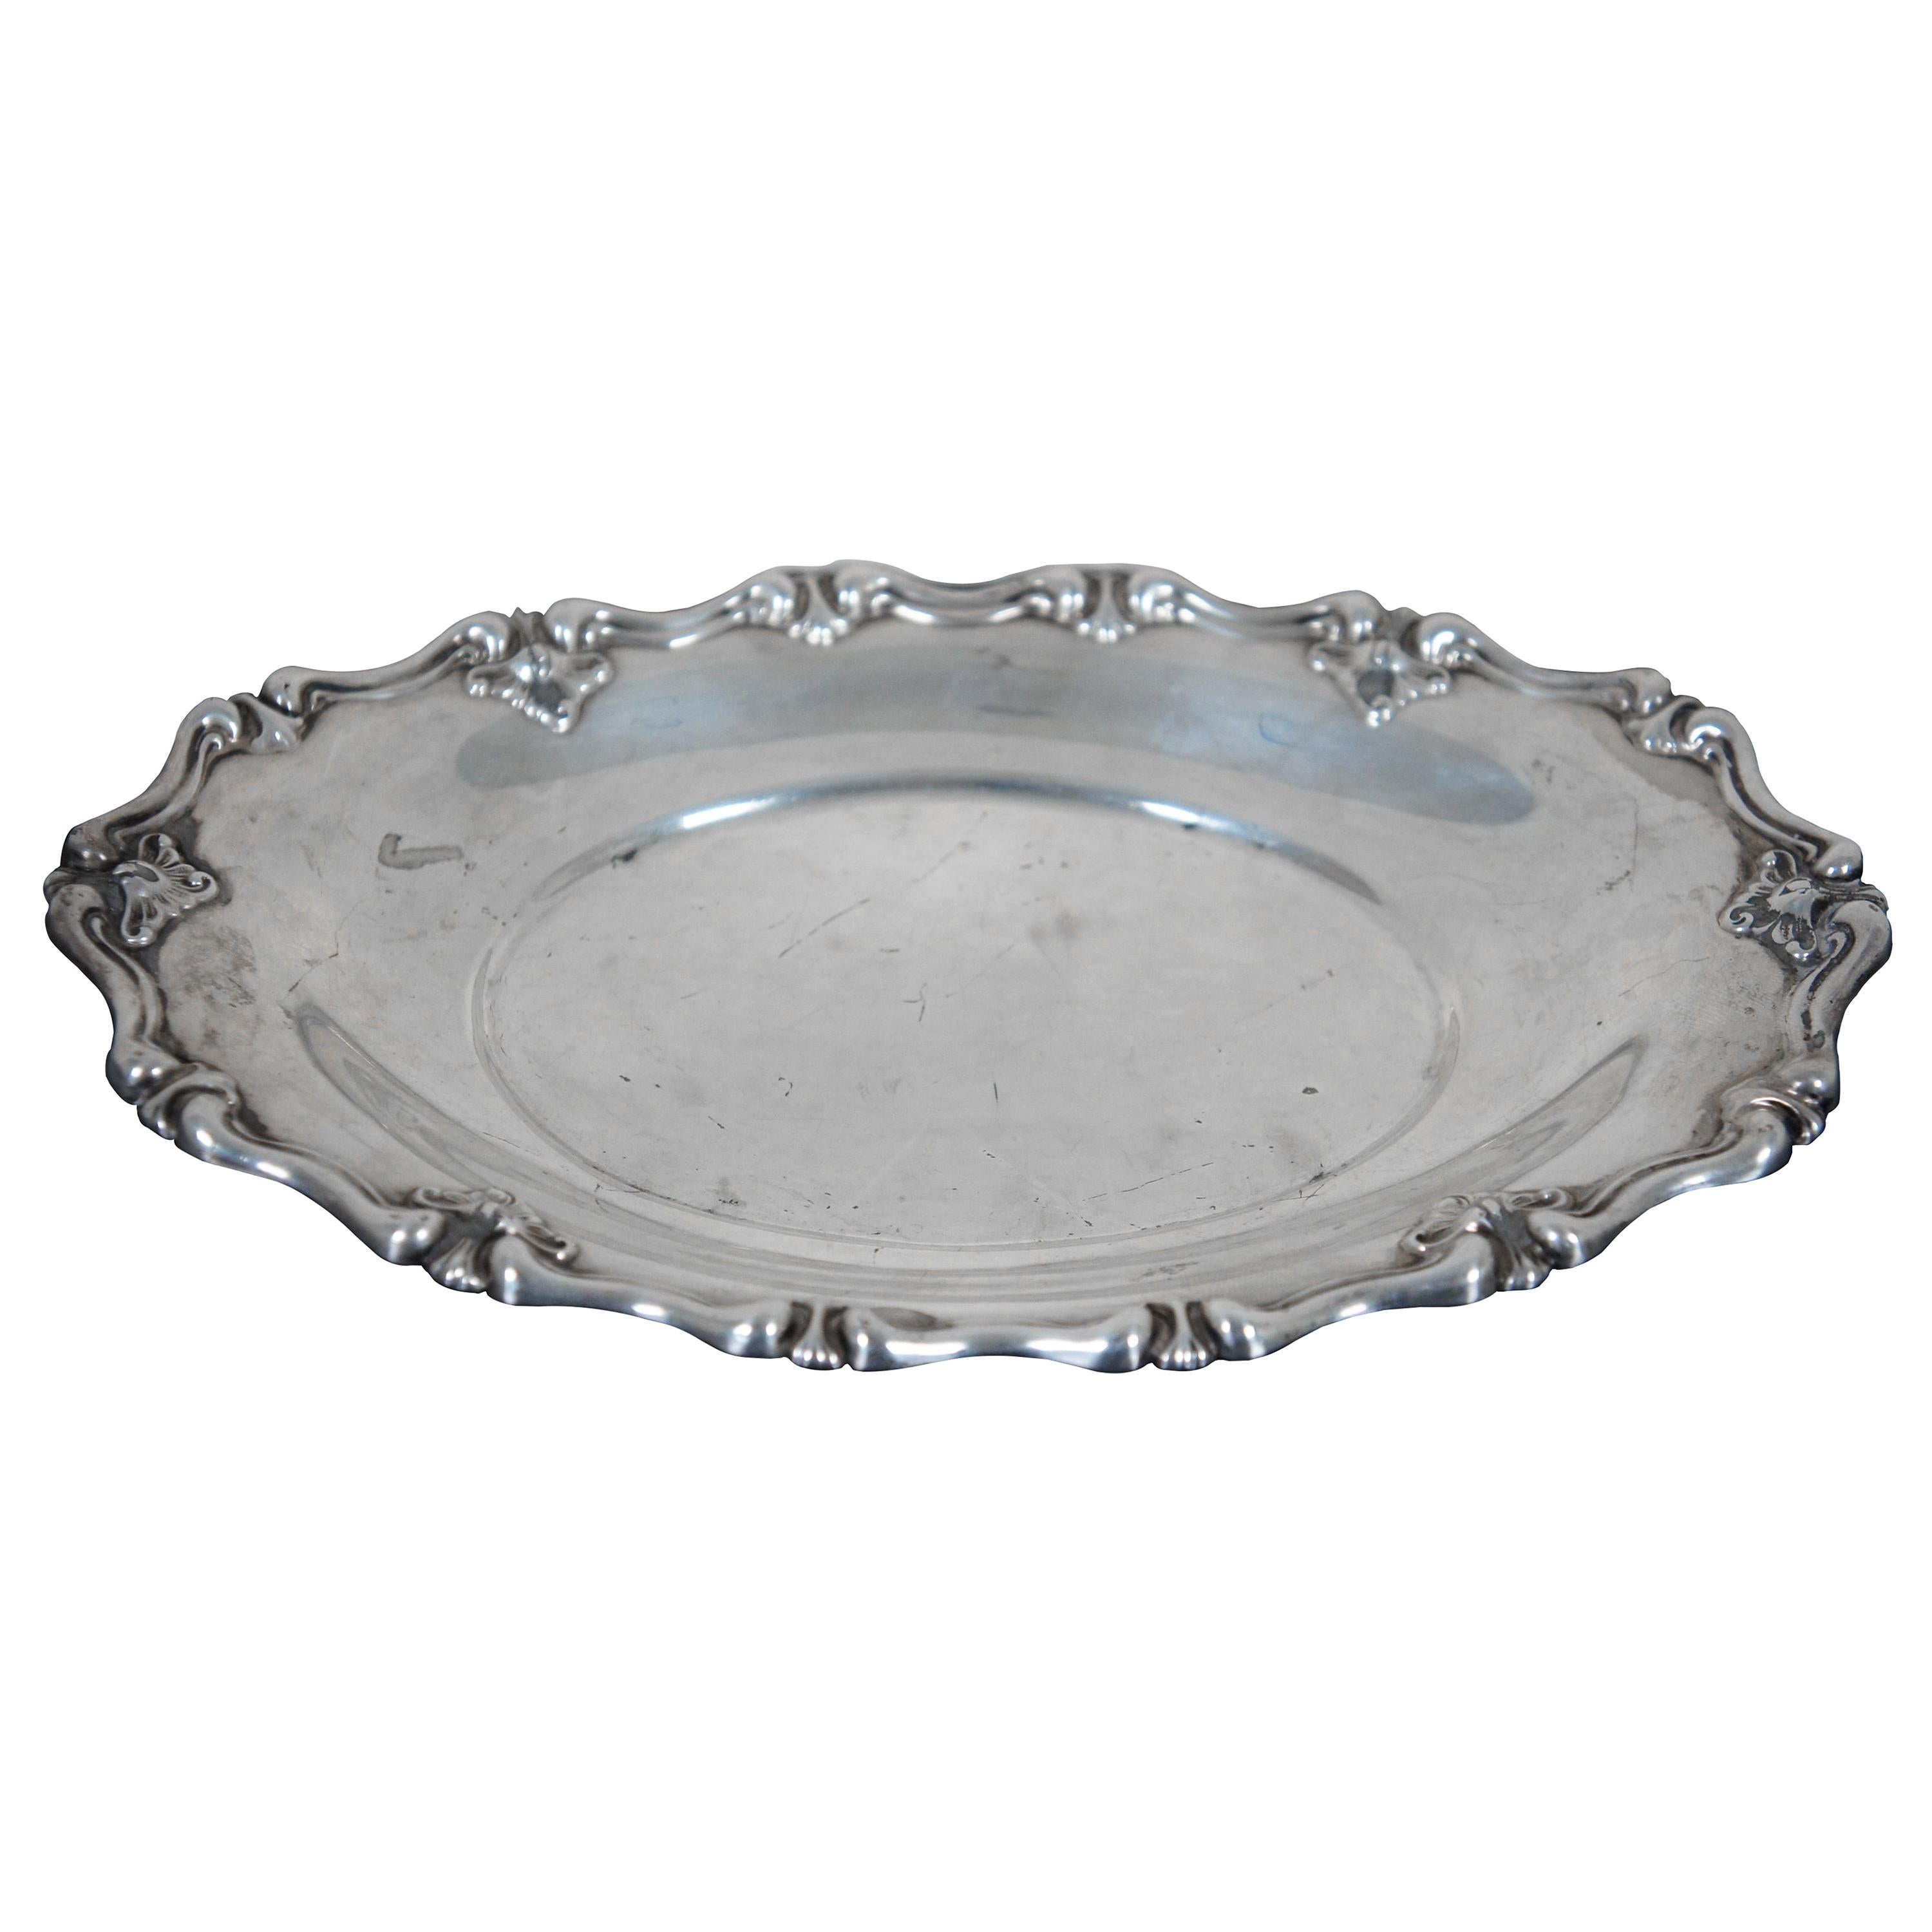 Spaulding & Co. Sterling Silver 925 Bread Tray Repousse Scalloped 3399 168g